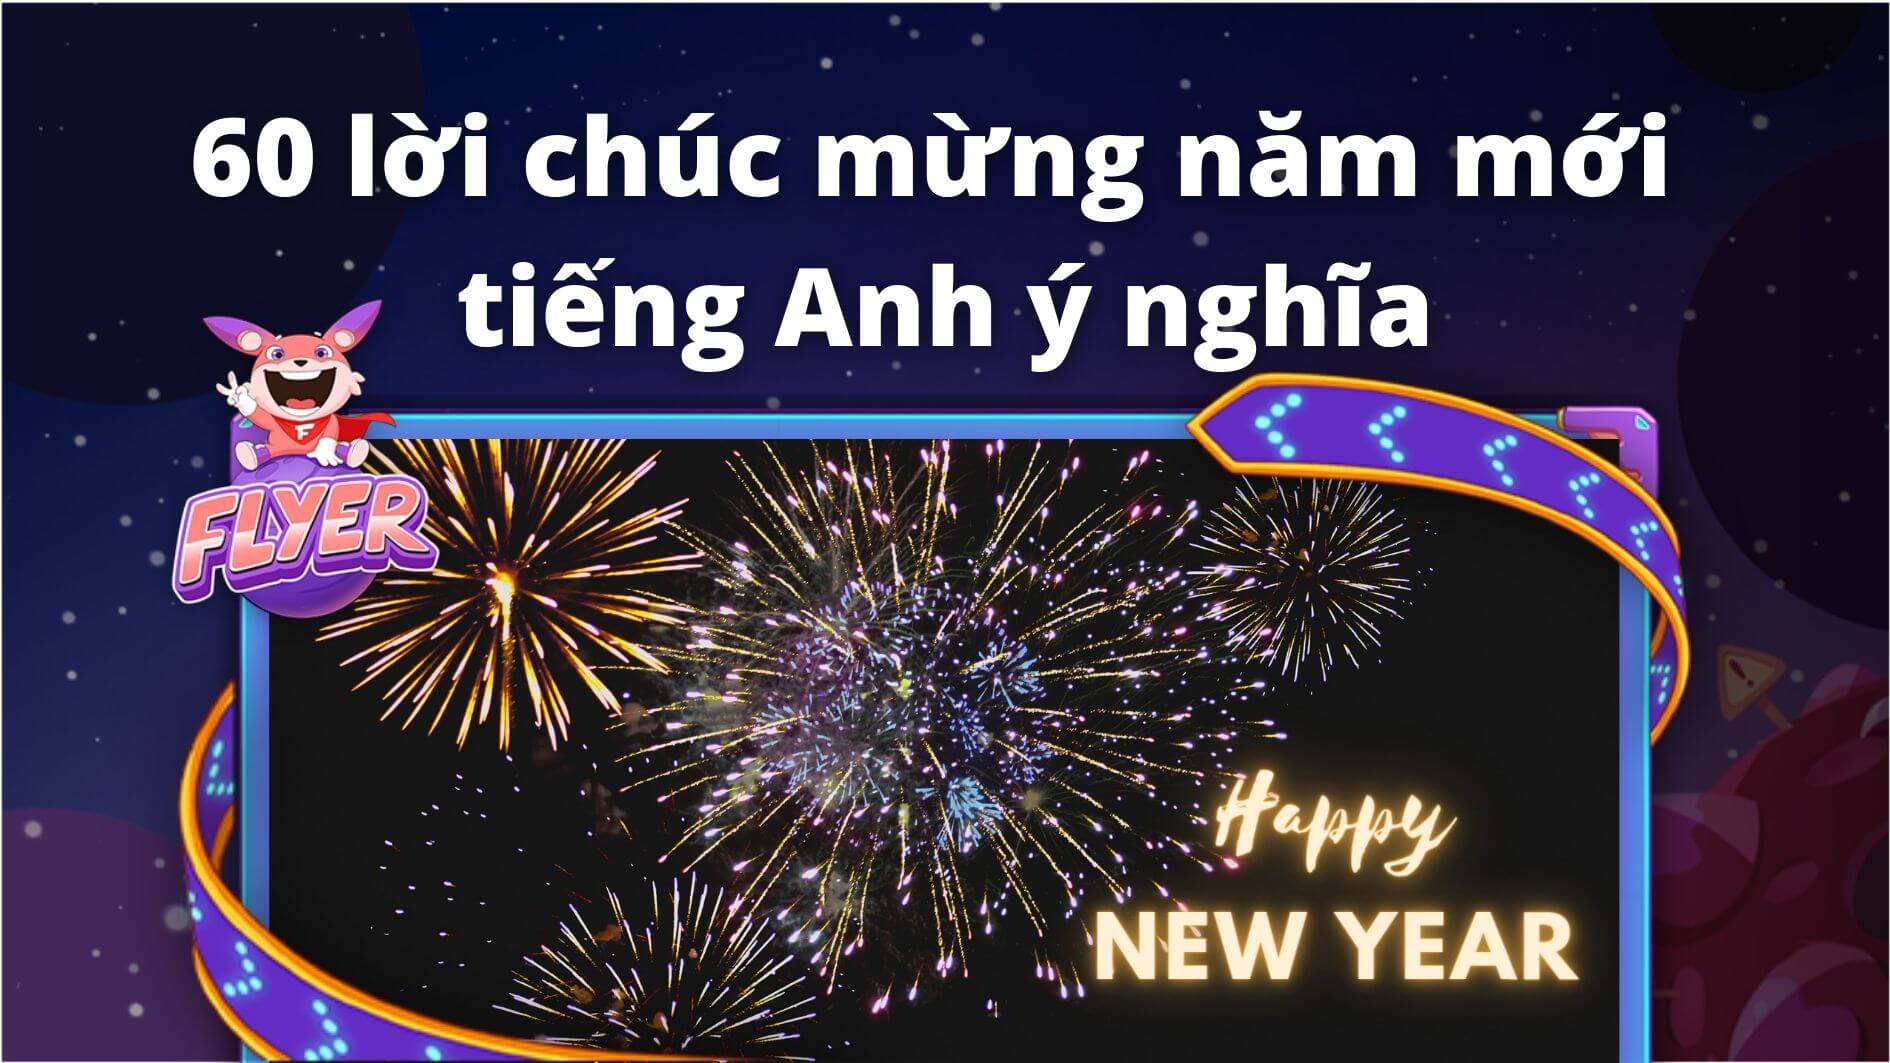 Thiệp chúc mừng năm mới 2024 bằng tiếng Anh: Wishing you a Happy New Year 2024 filled with joy, peace and prosperity. May your days be filled with love, laughter and unforgettable moments. Let your loved ones know you care by sending them New Year greeting cards in English. Spread positivity and good vibes as we welcome the new year together.